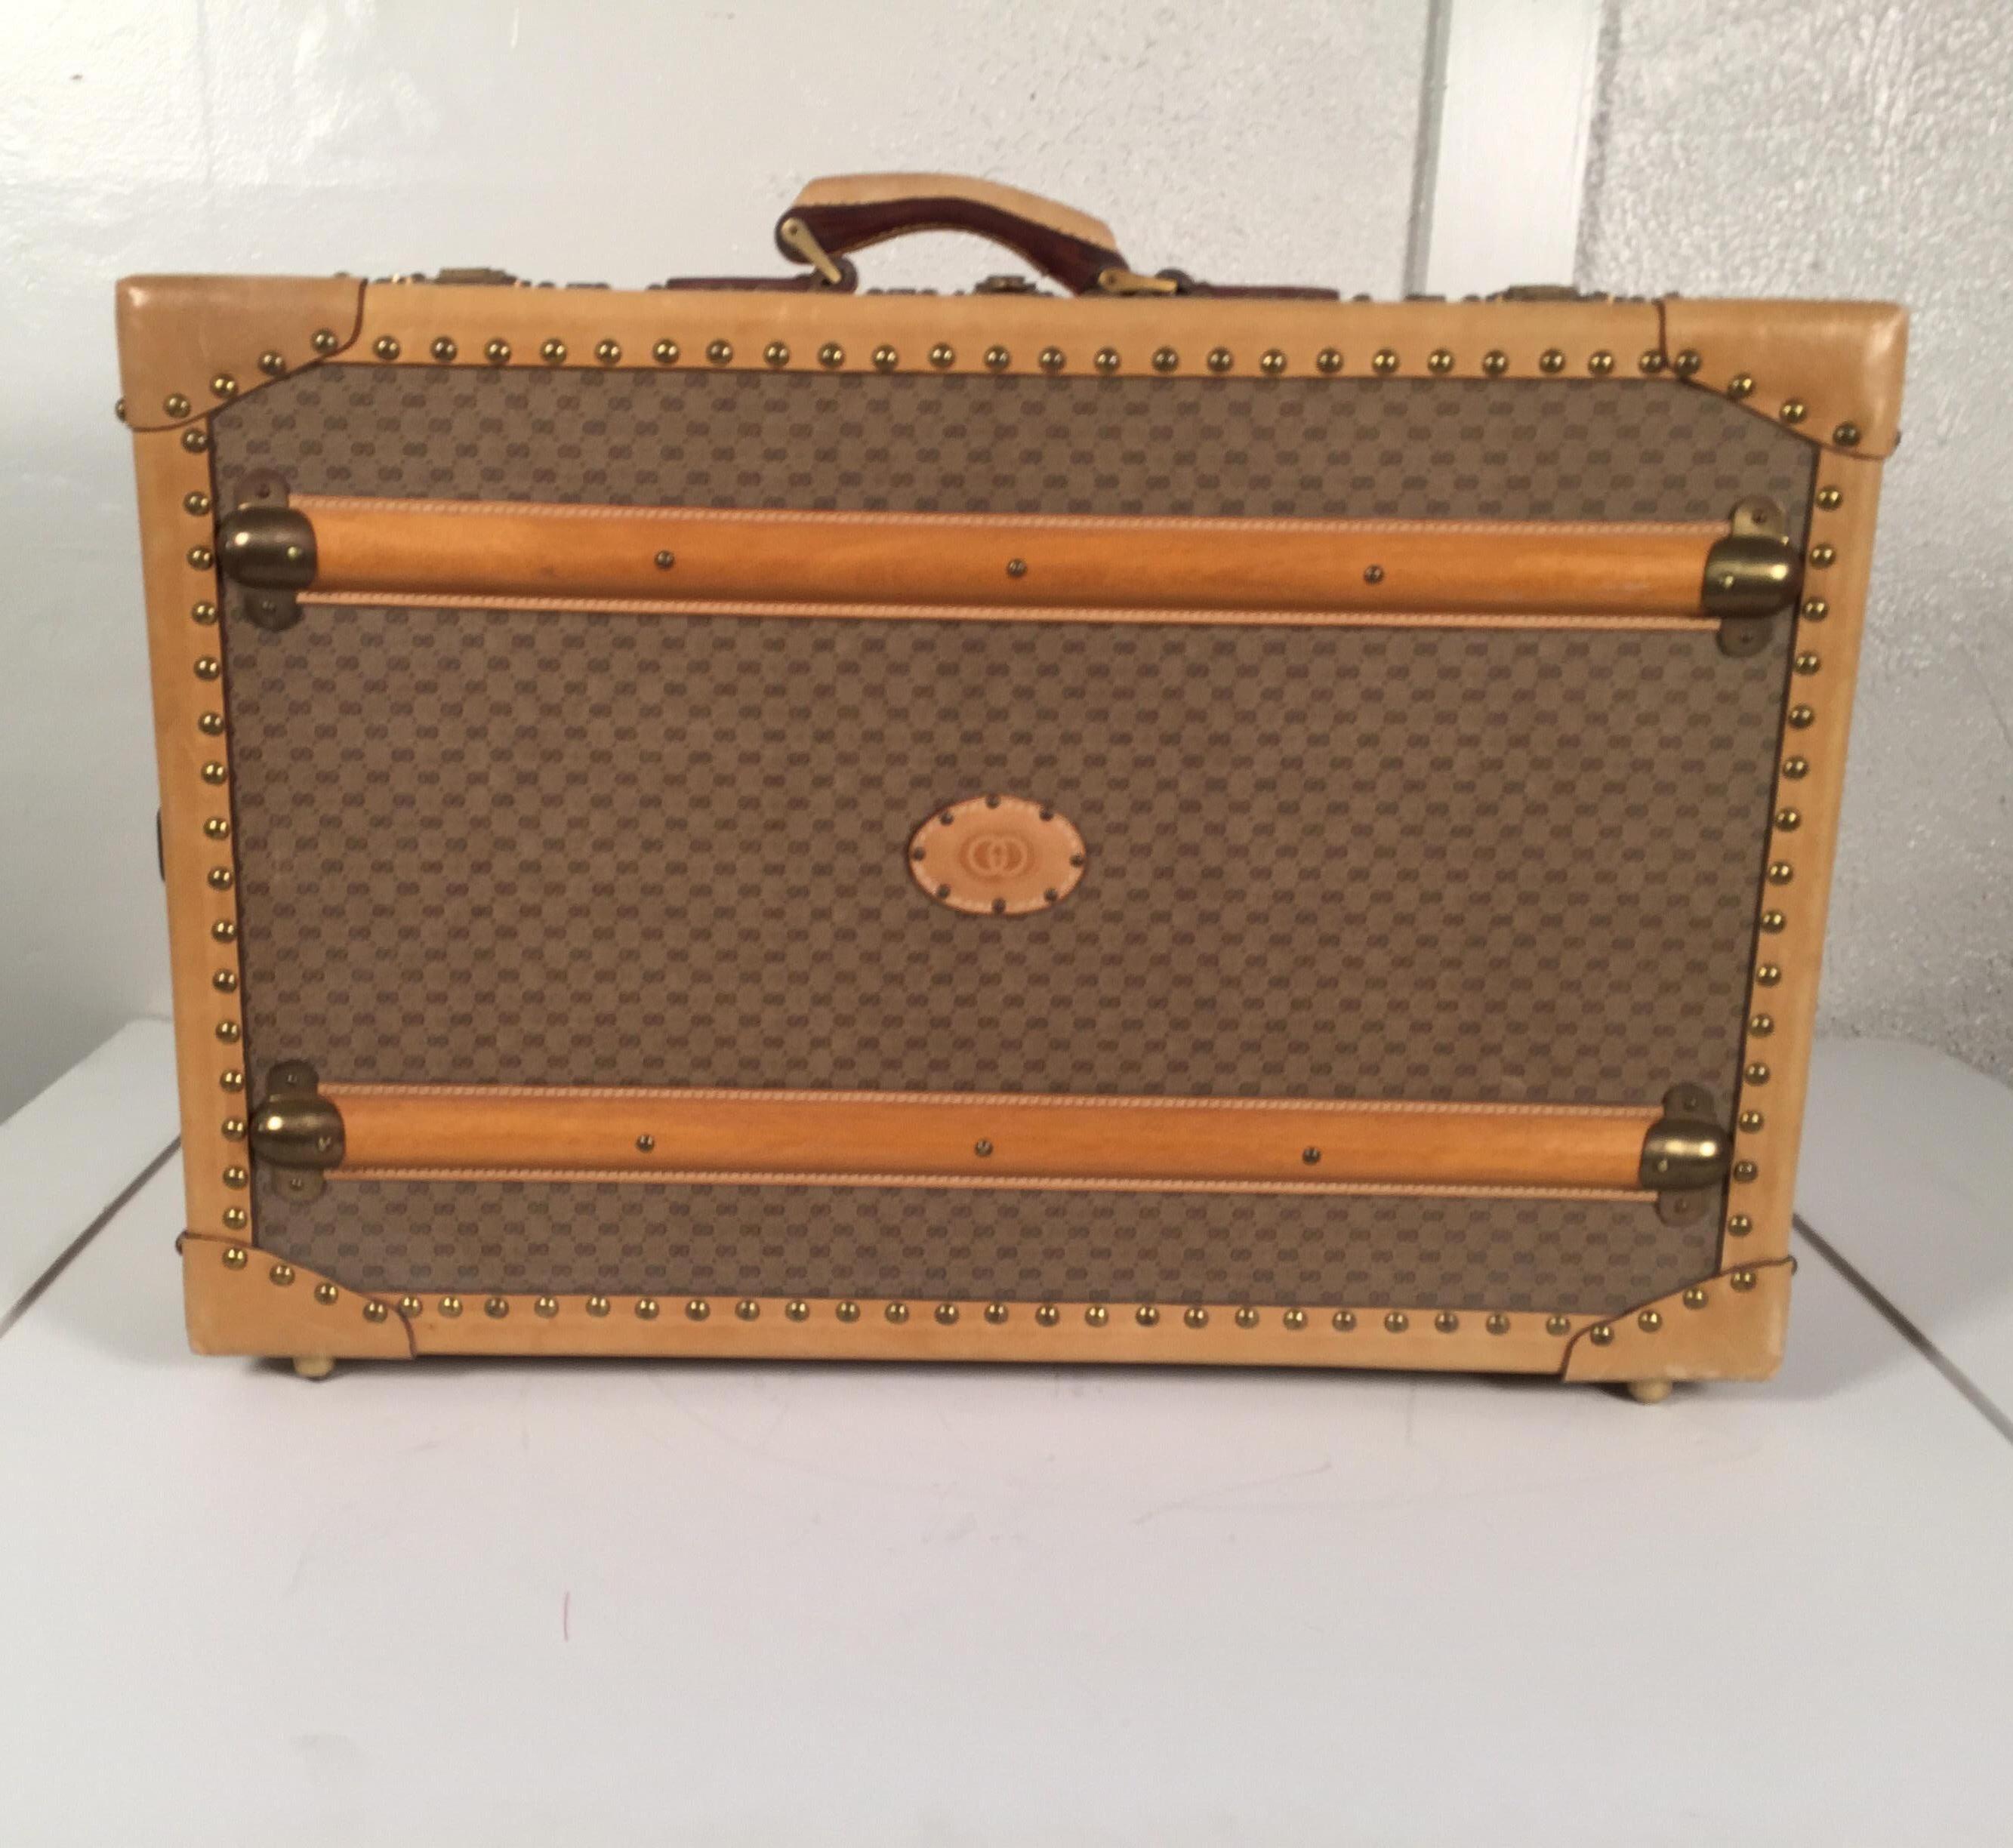 1970s original Gucci logo hard sided suitcase or travel trunk, excellent unused condition.
Scarce hand sided Gucci suitcase with brass hardware and leather and brass nailhead trim. Wooden slats on the side bound by brass to protect the